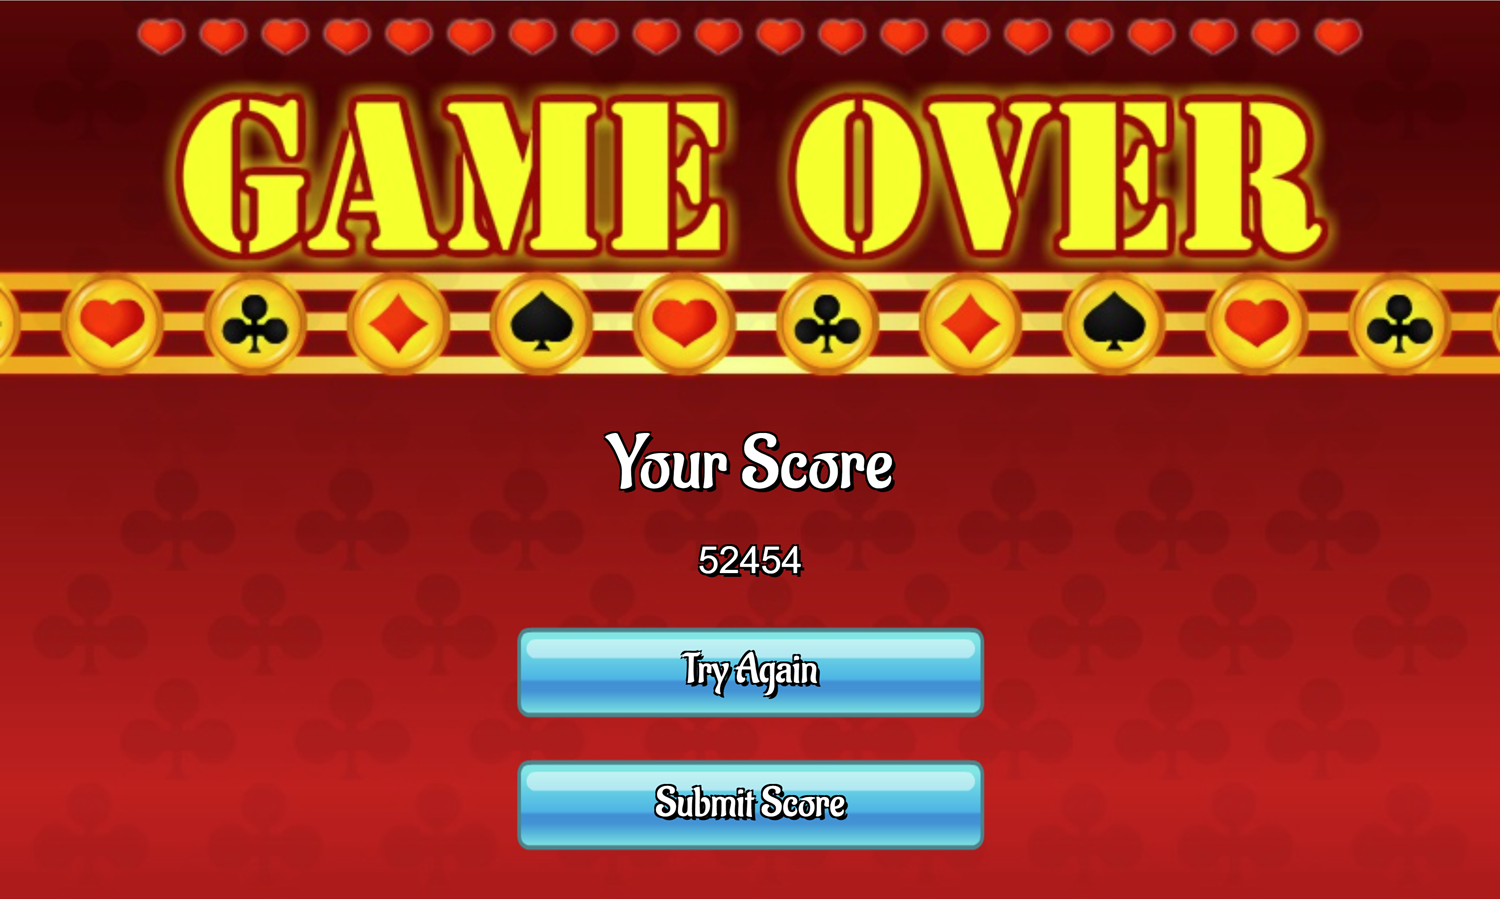 Forty Thieves Solitaire Game Over Screen Screenshot.